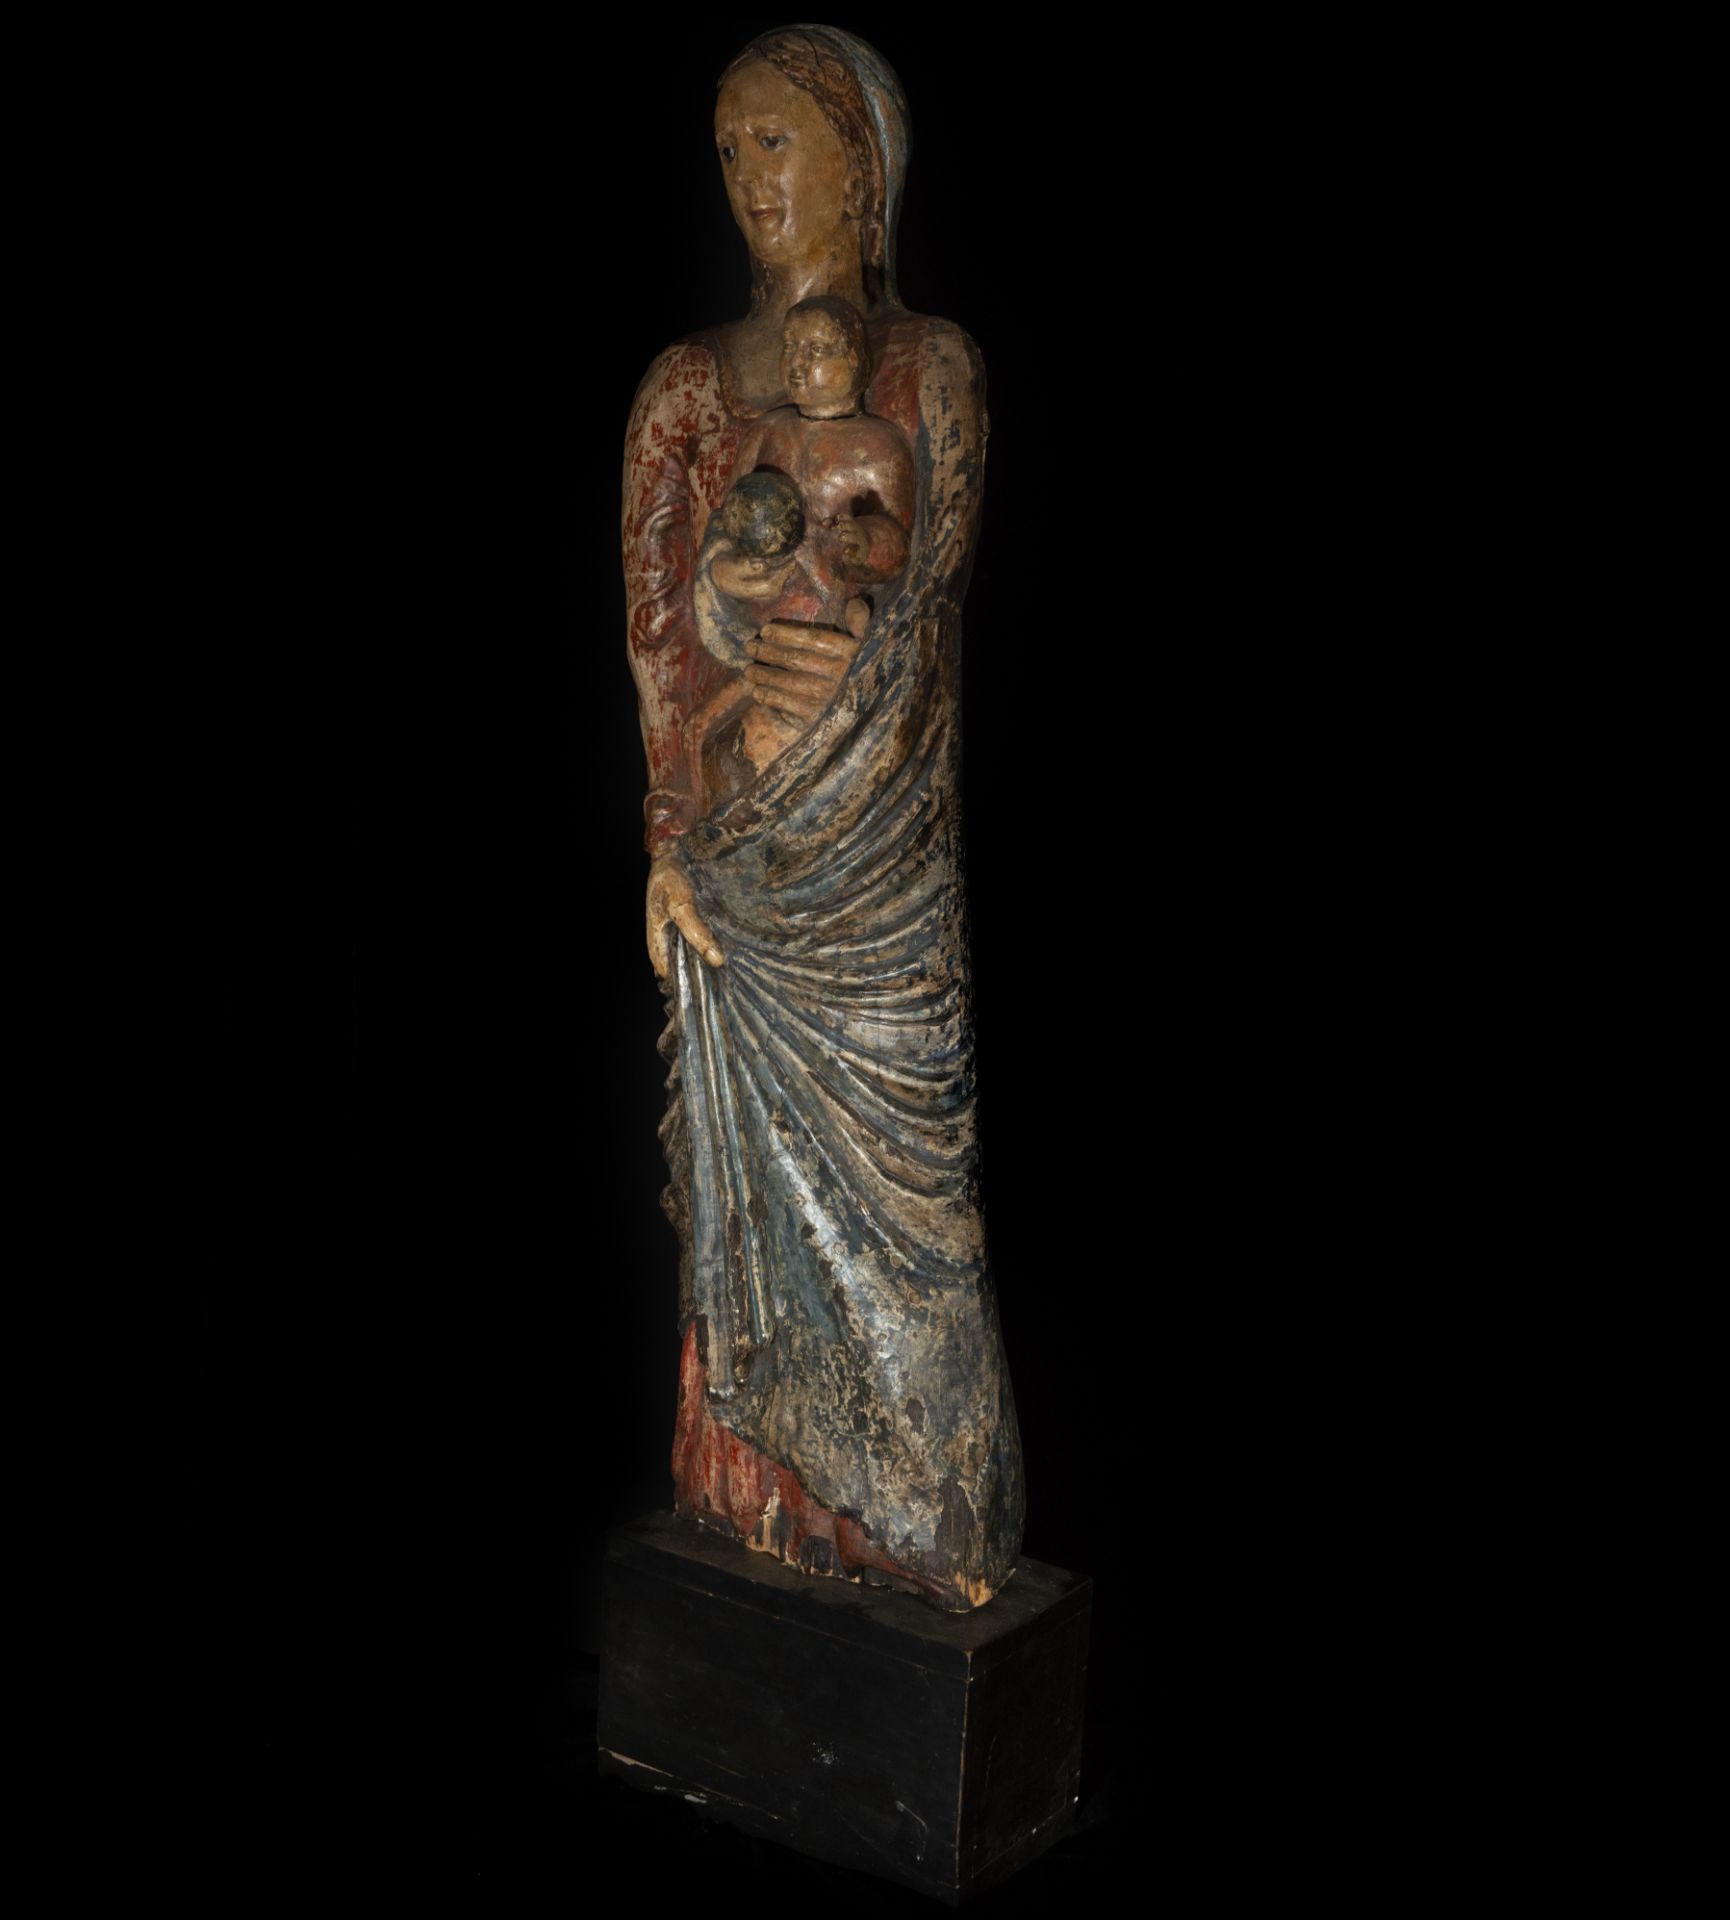 Magnificent 13th century Late Romanesque Virgin from Northern Italy, possibly Lombardy - Image 2 of 4